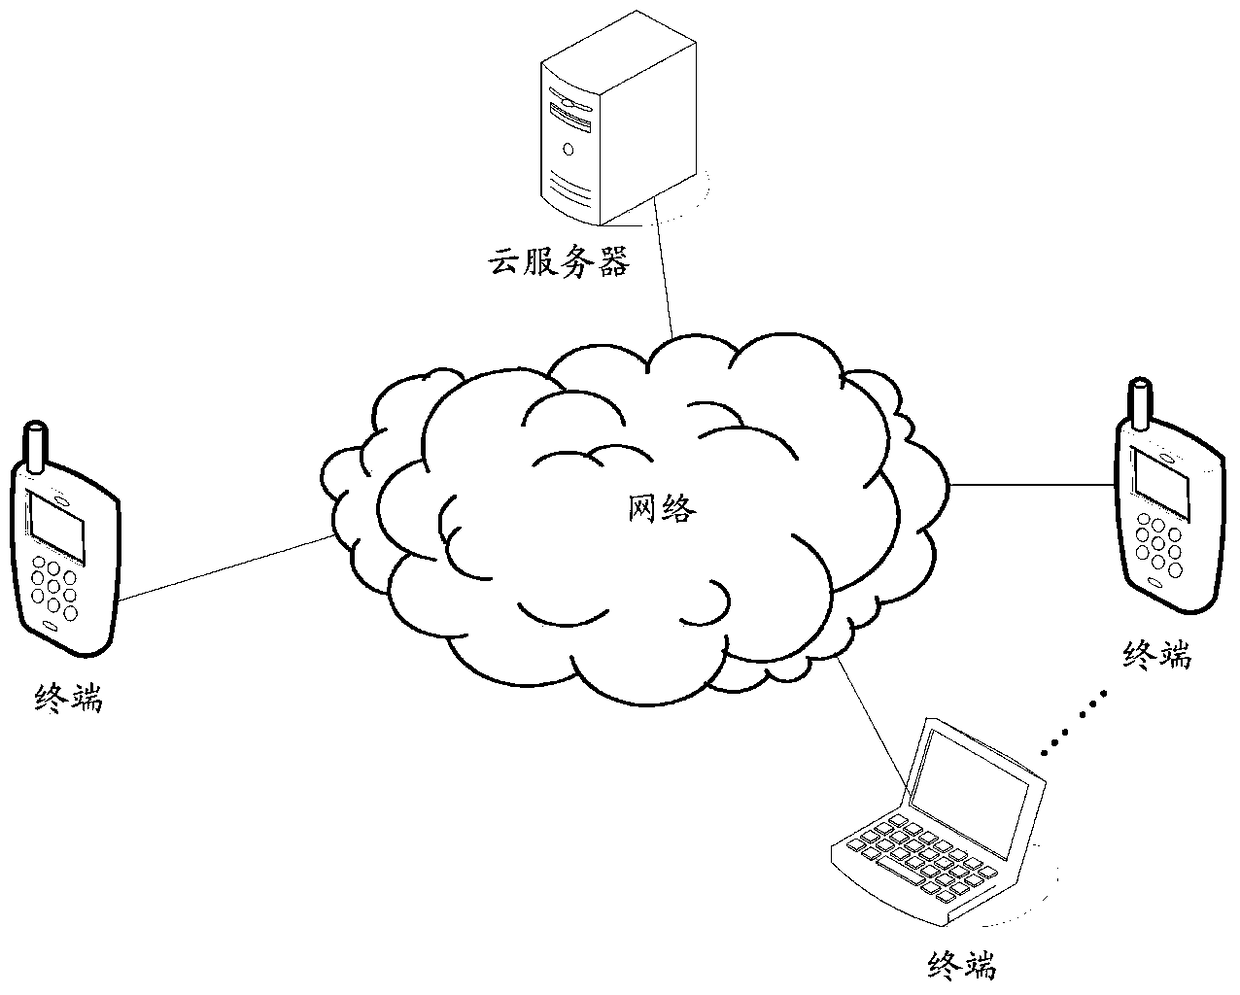 A backup method, device and electronic equipment for video files